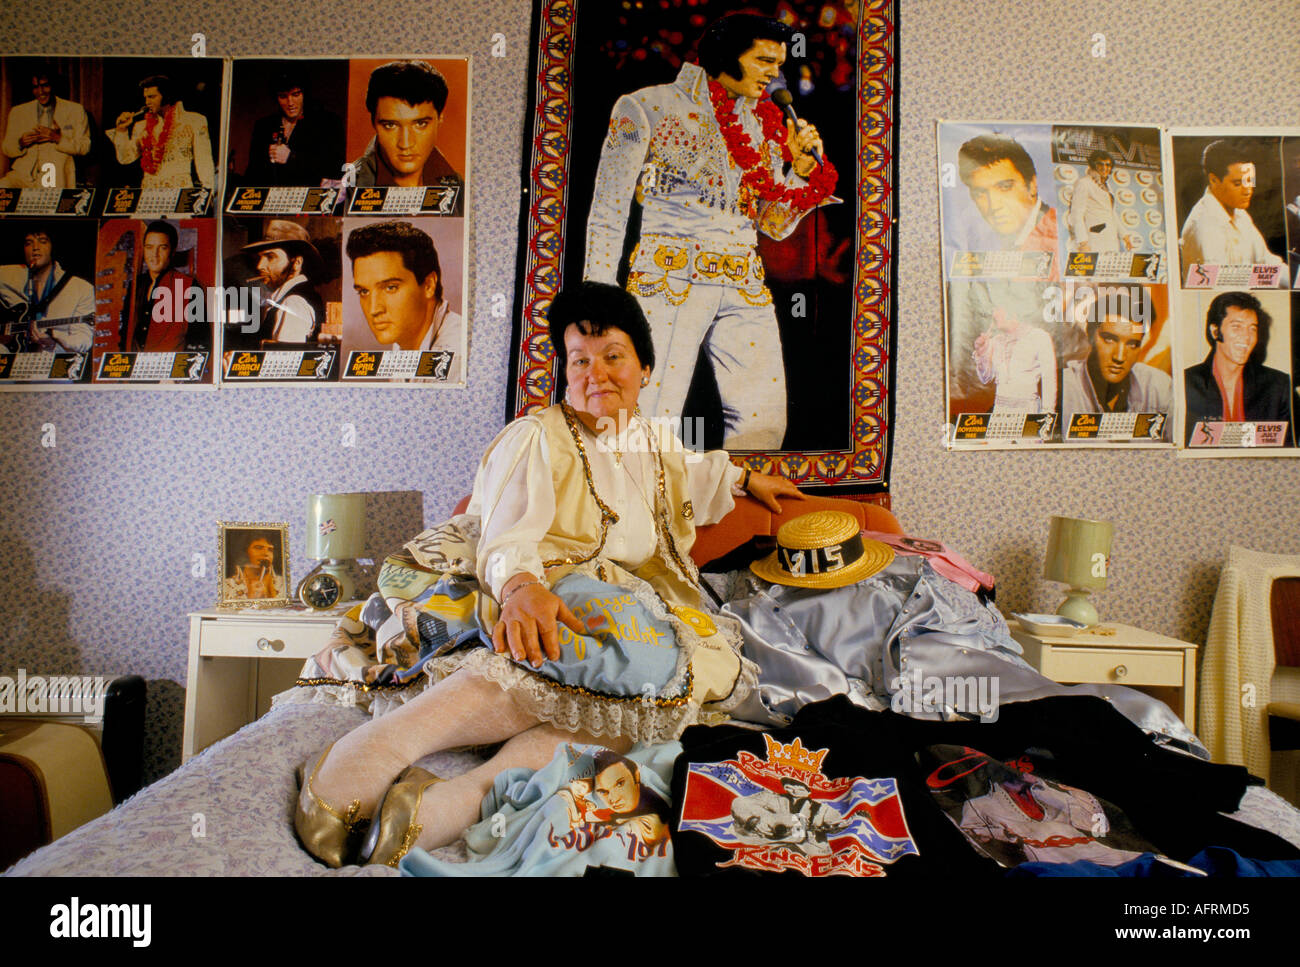 Elvis Presley fan with memorabilia and wearing an Elvis patterned dress and earrings. This is her tribute bedroom. 1990s 90s HOMER SYKES Stock Photo